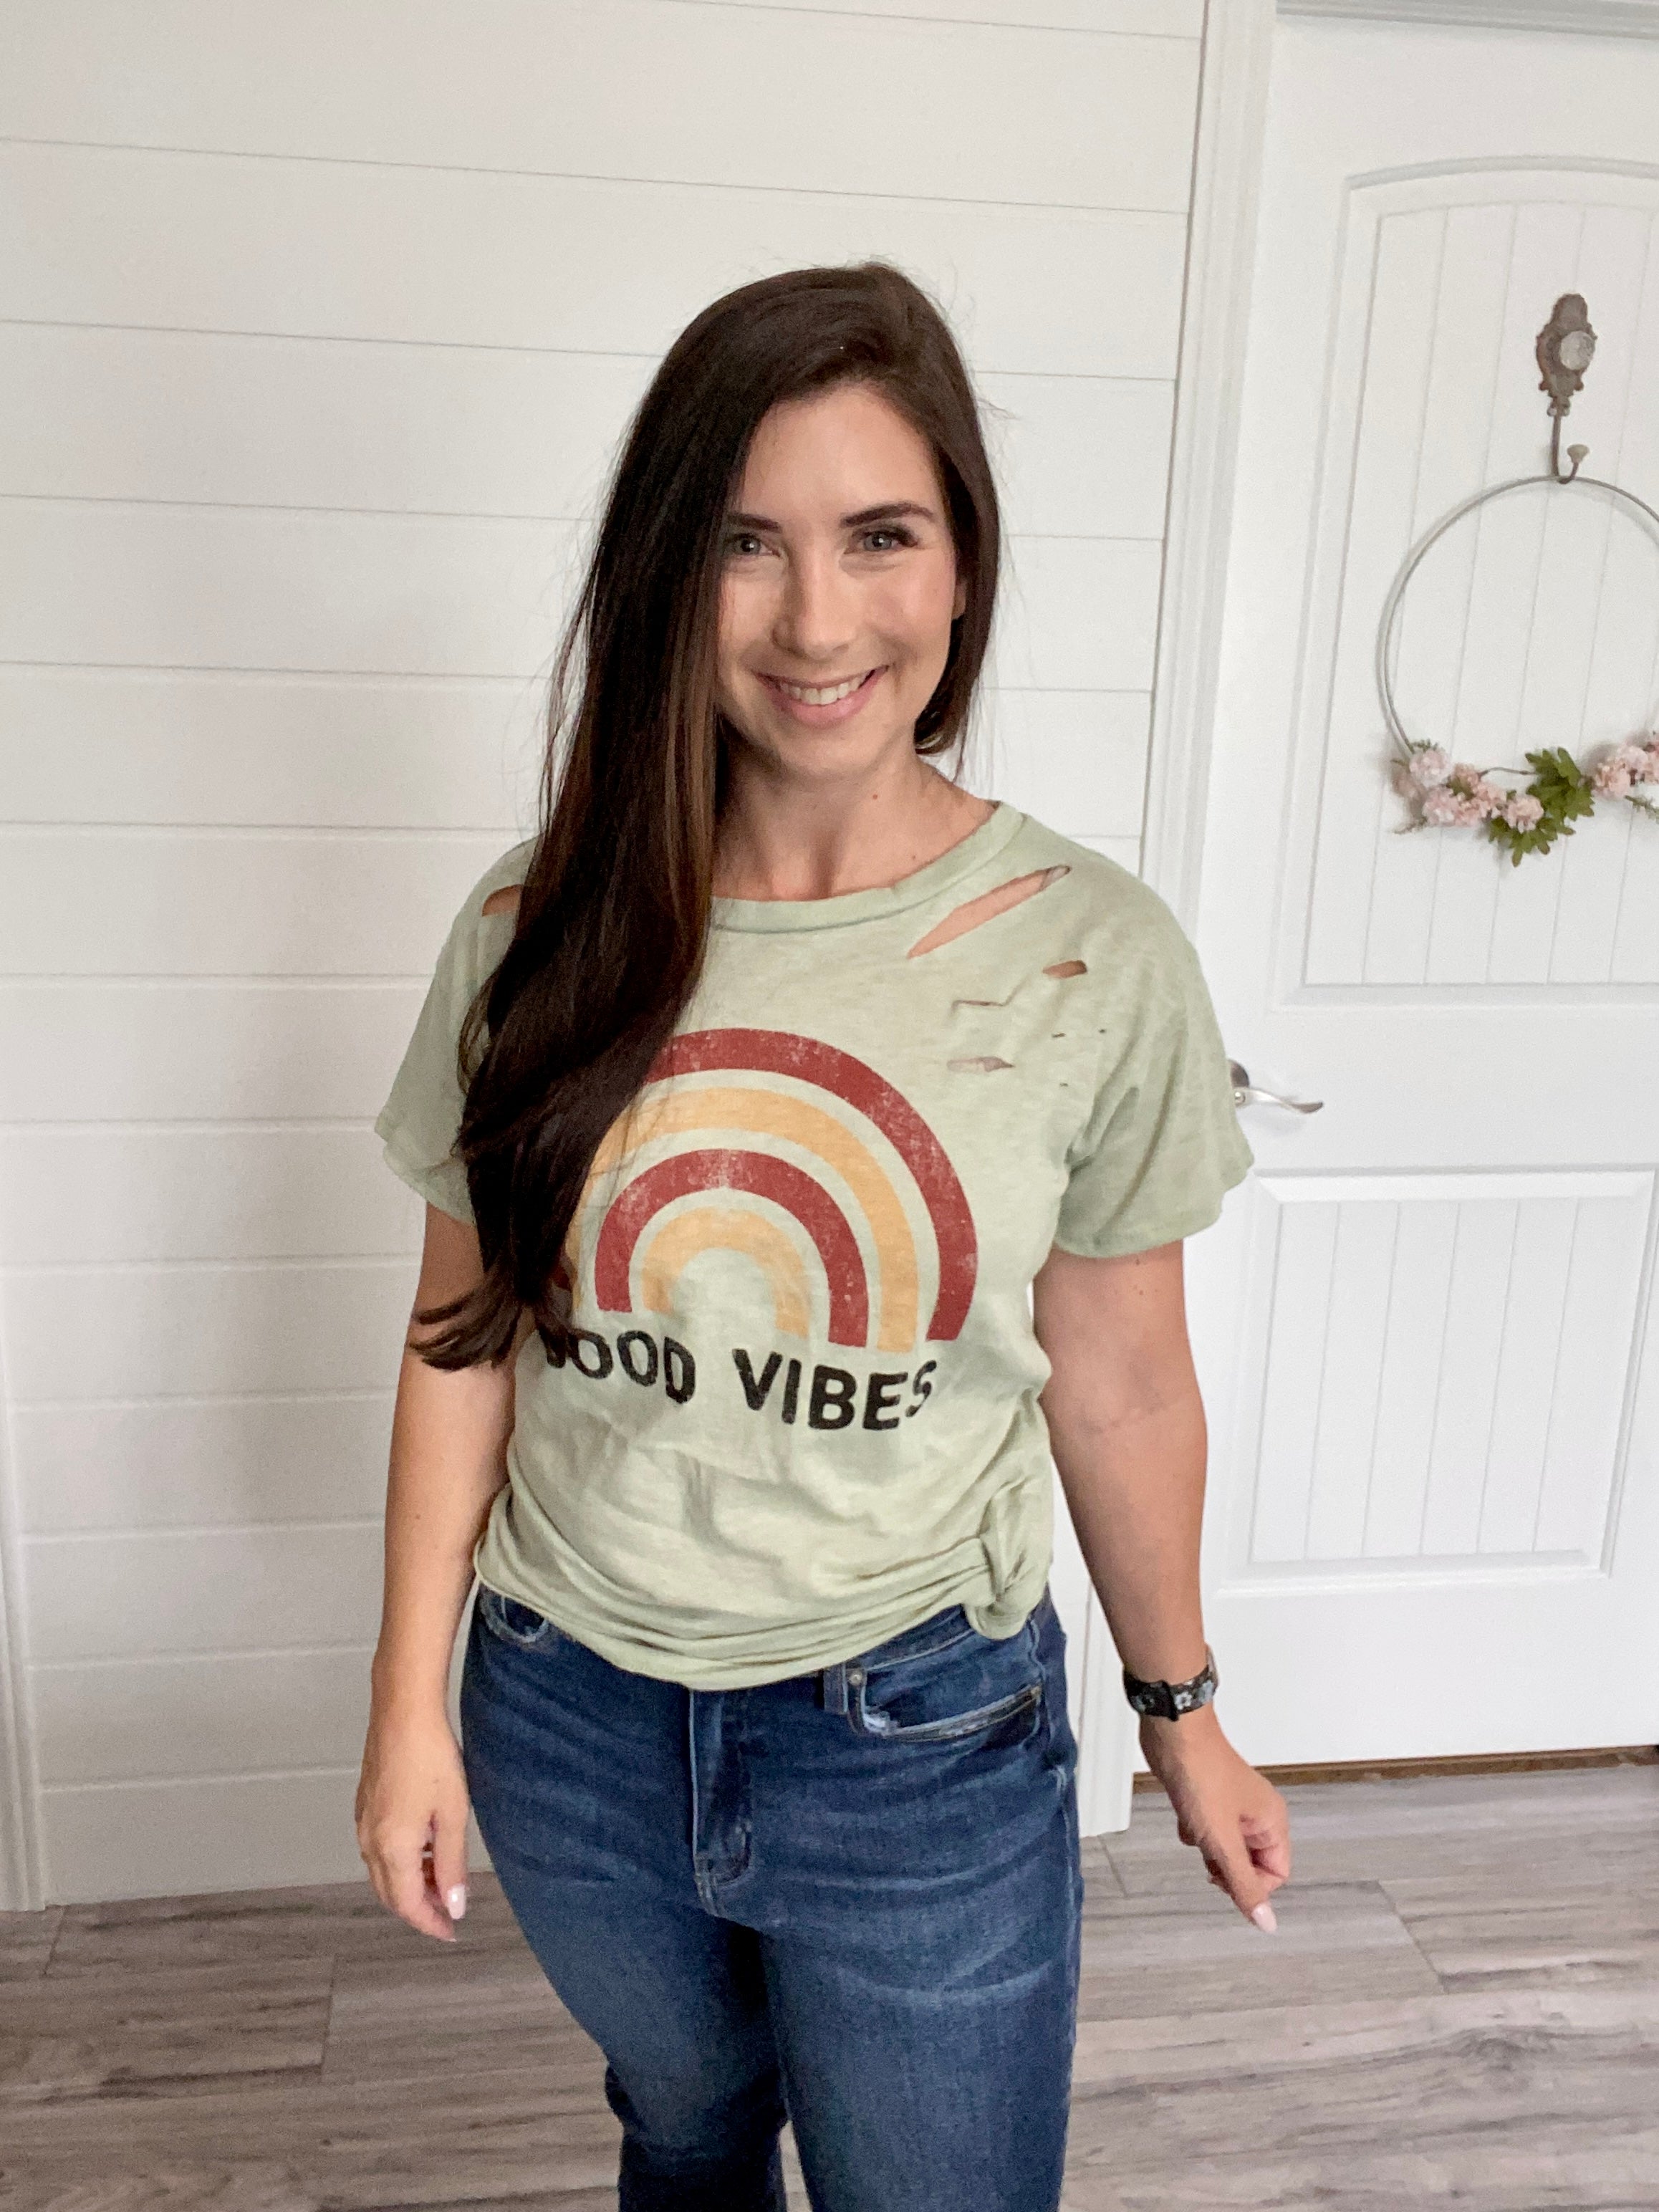 The Good Vibes Top